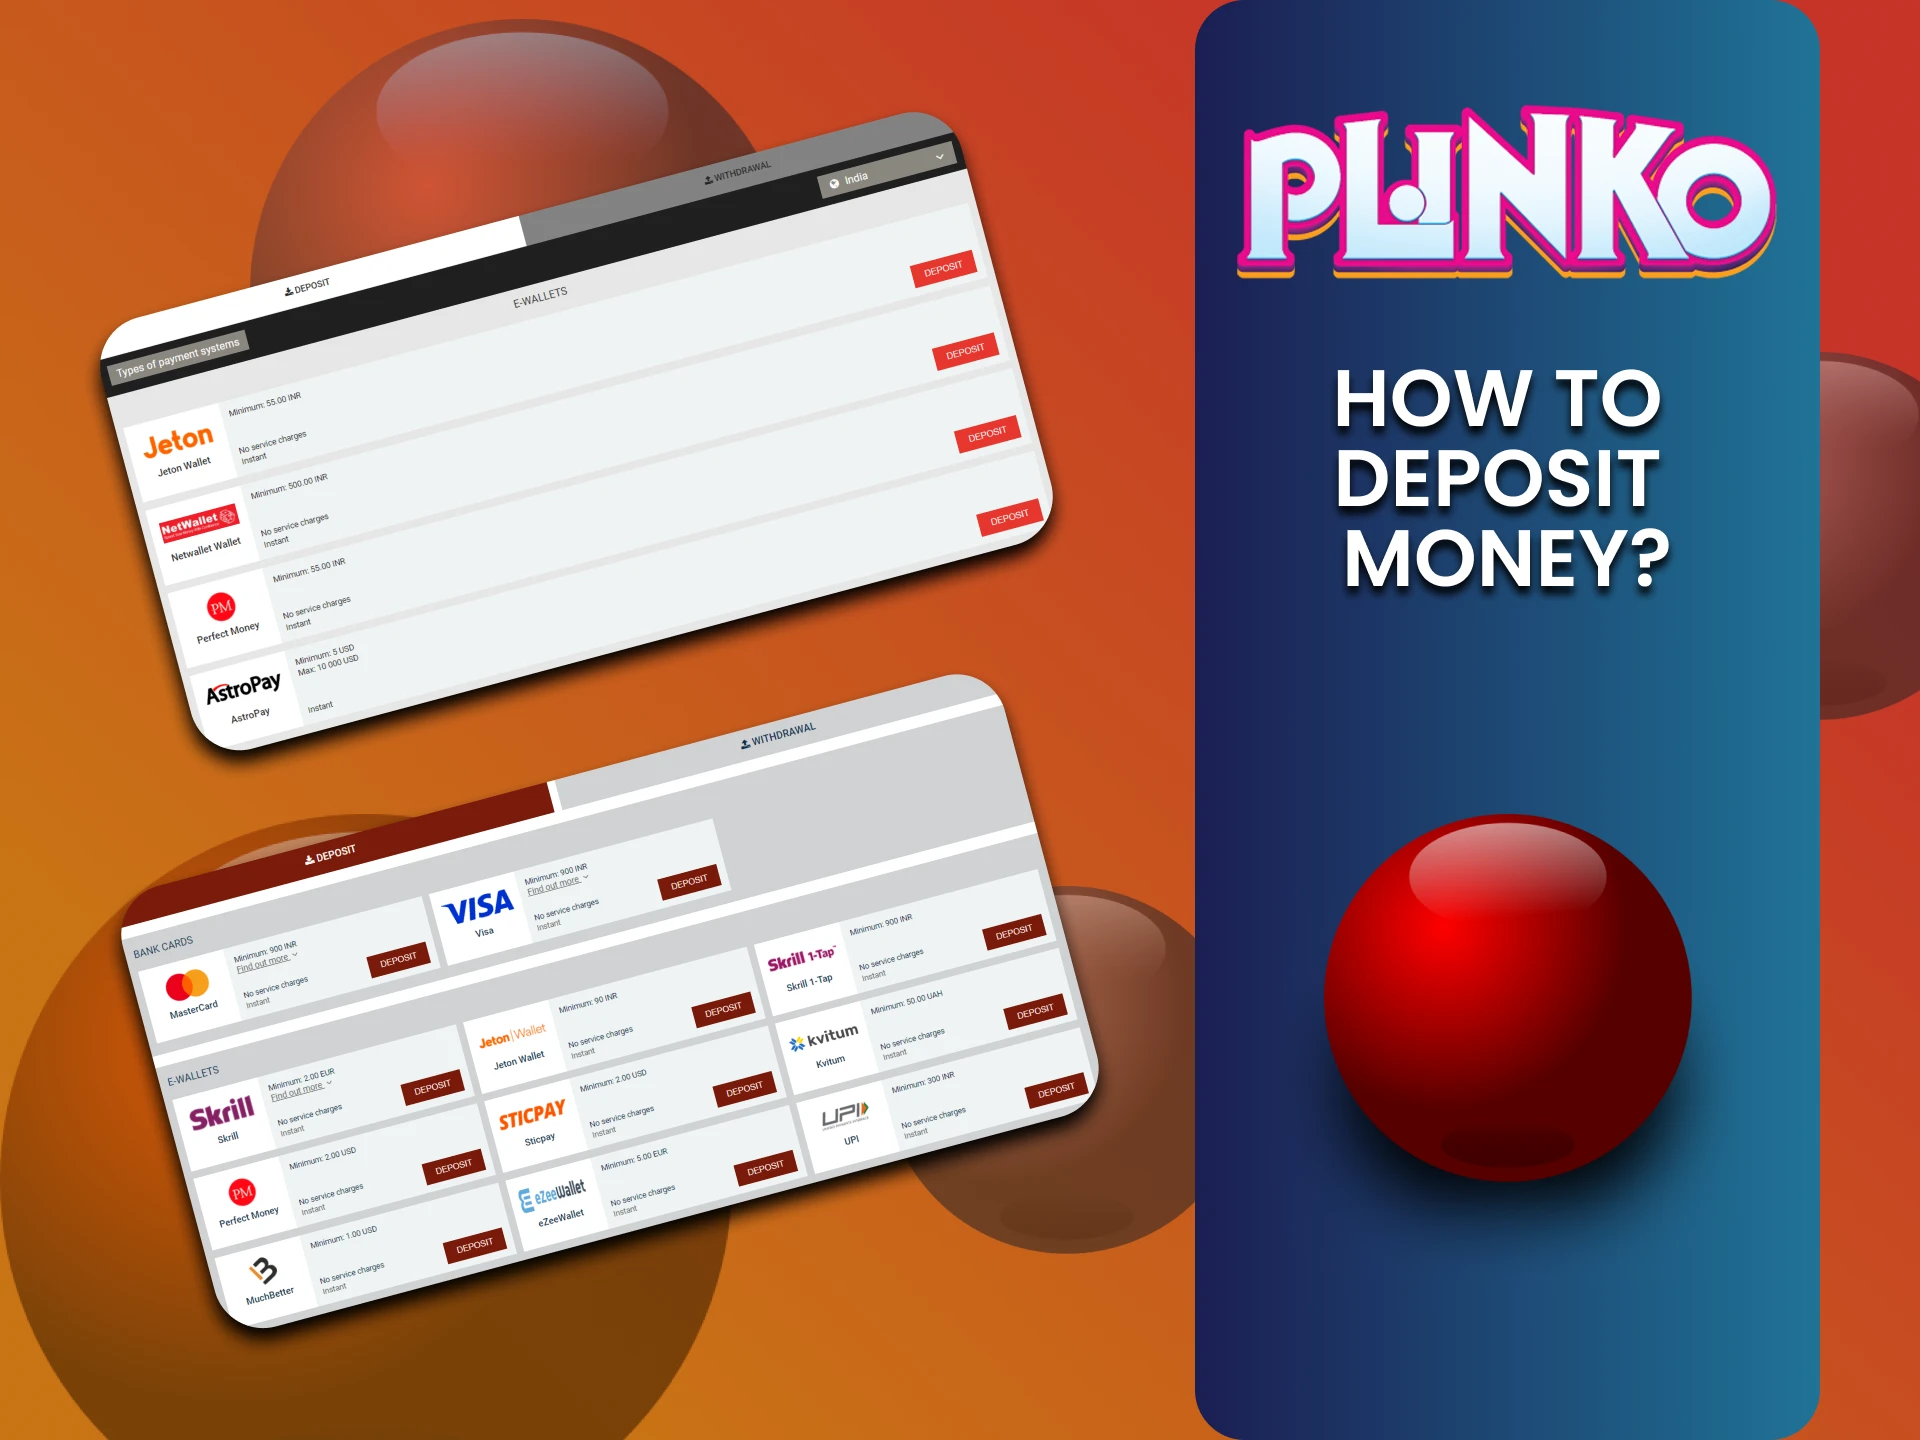 We will tell you how to top up your deposit for the Plinko game.